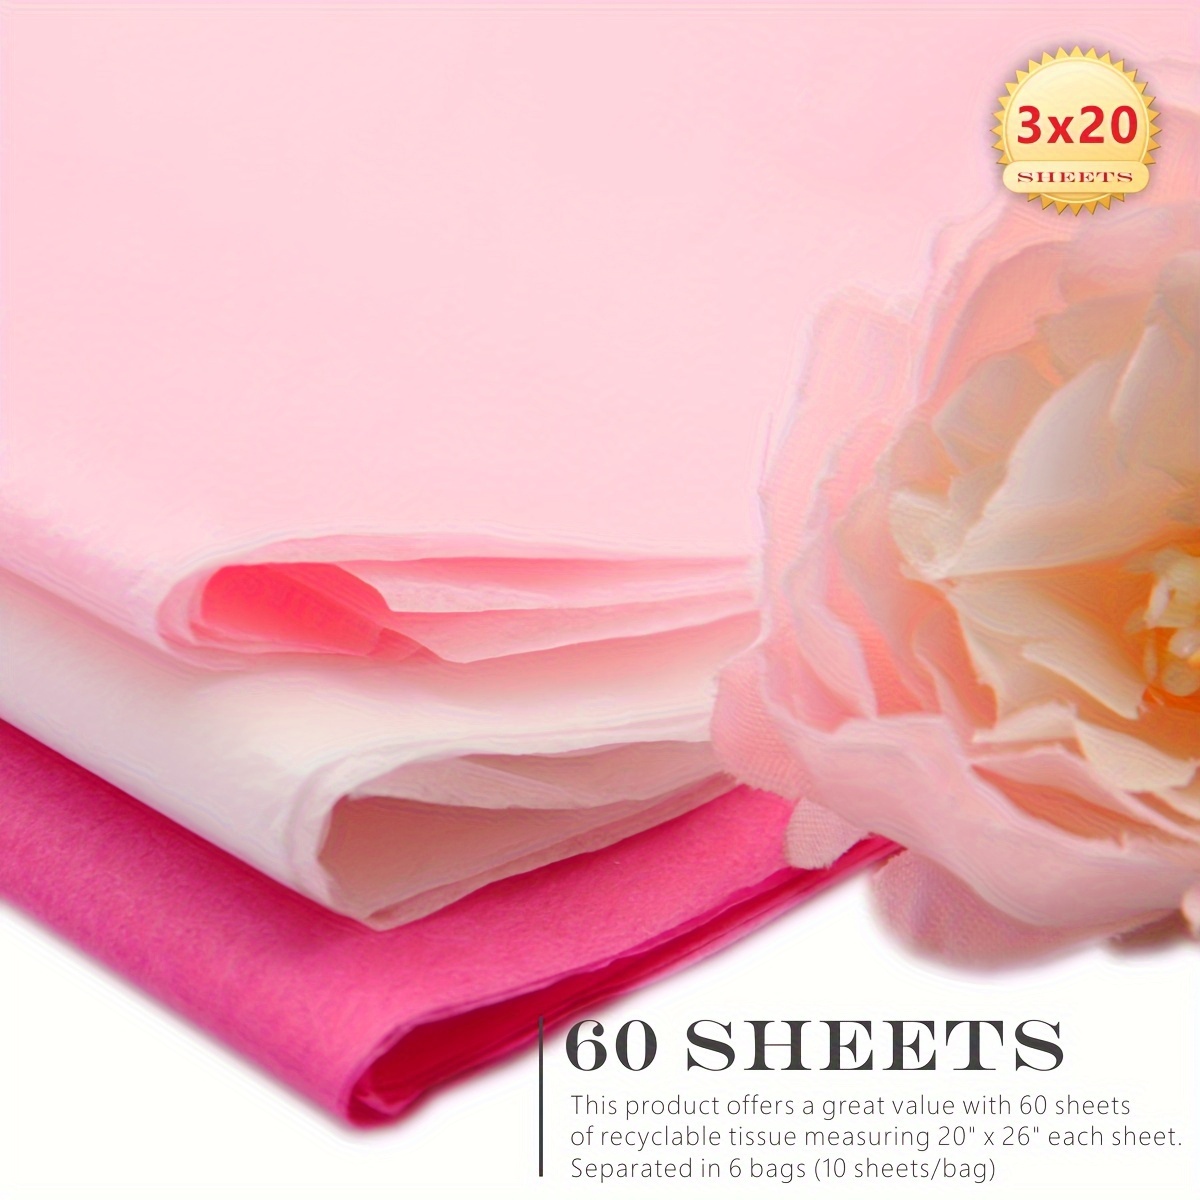 Hot Pink Floral Wrapping Paper - 20 Sheets